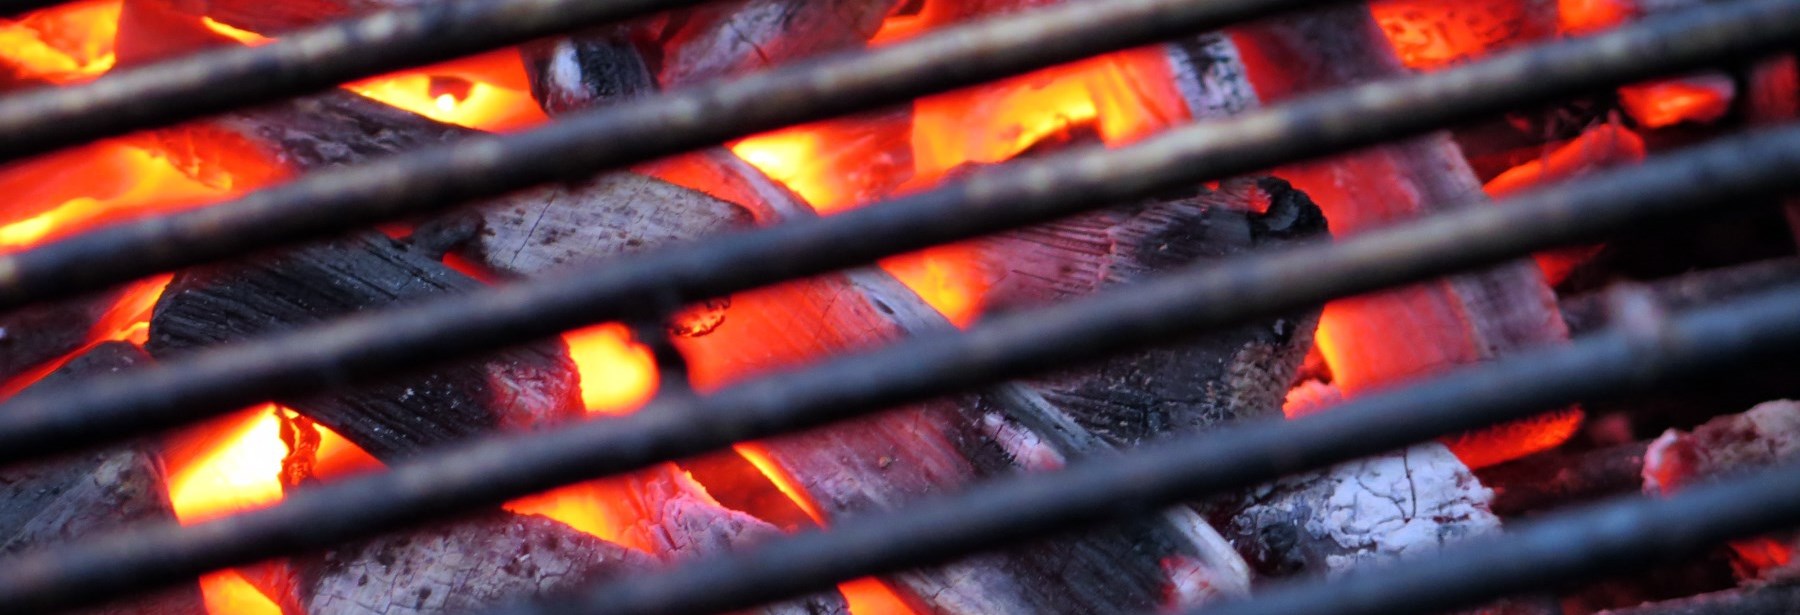 Barbeque grill showing coals and fire below